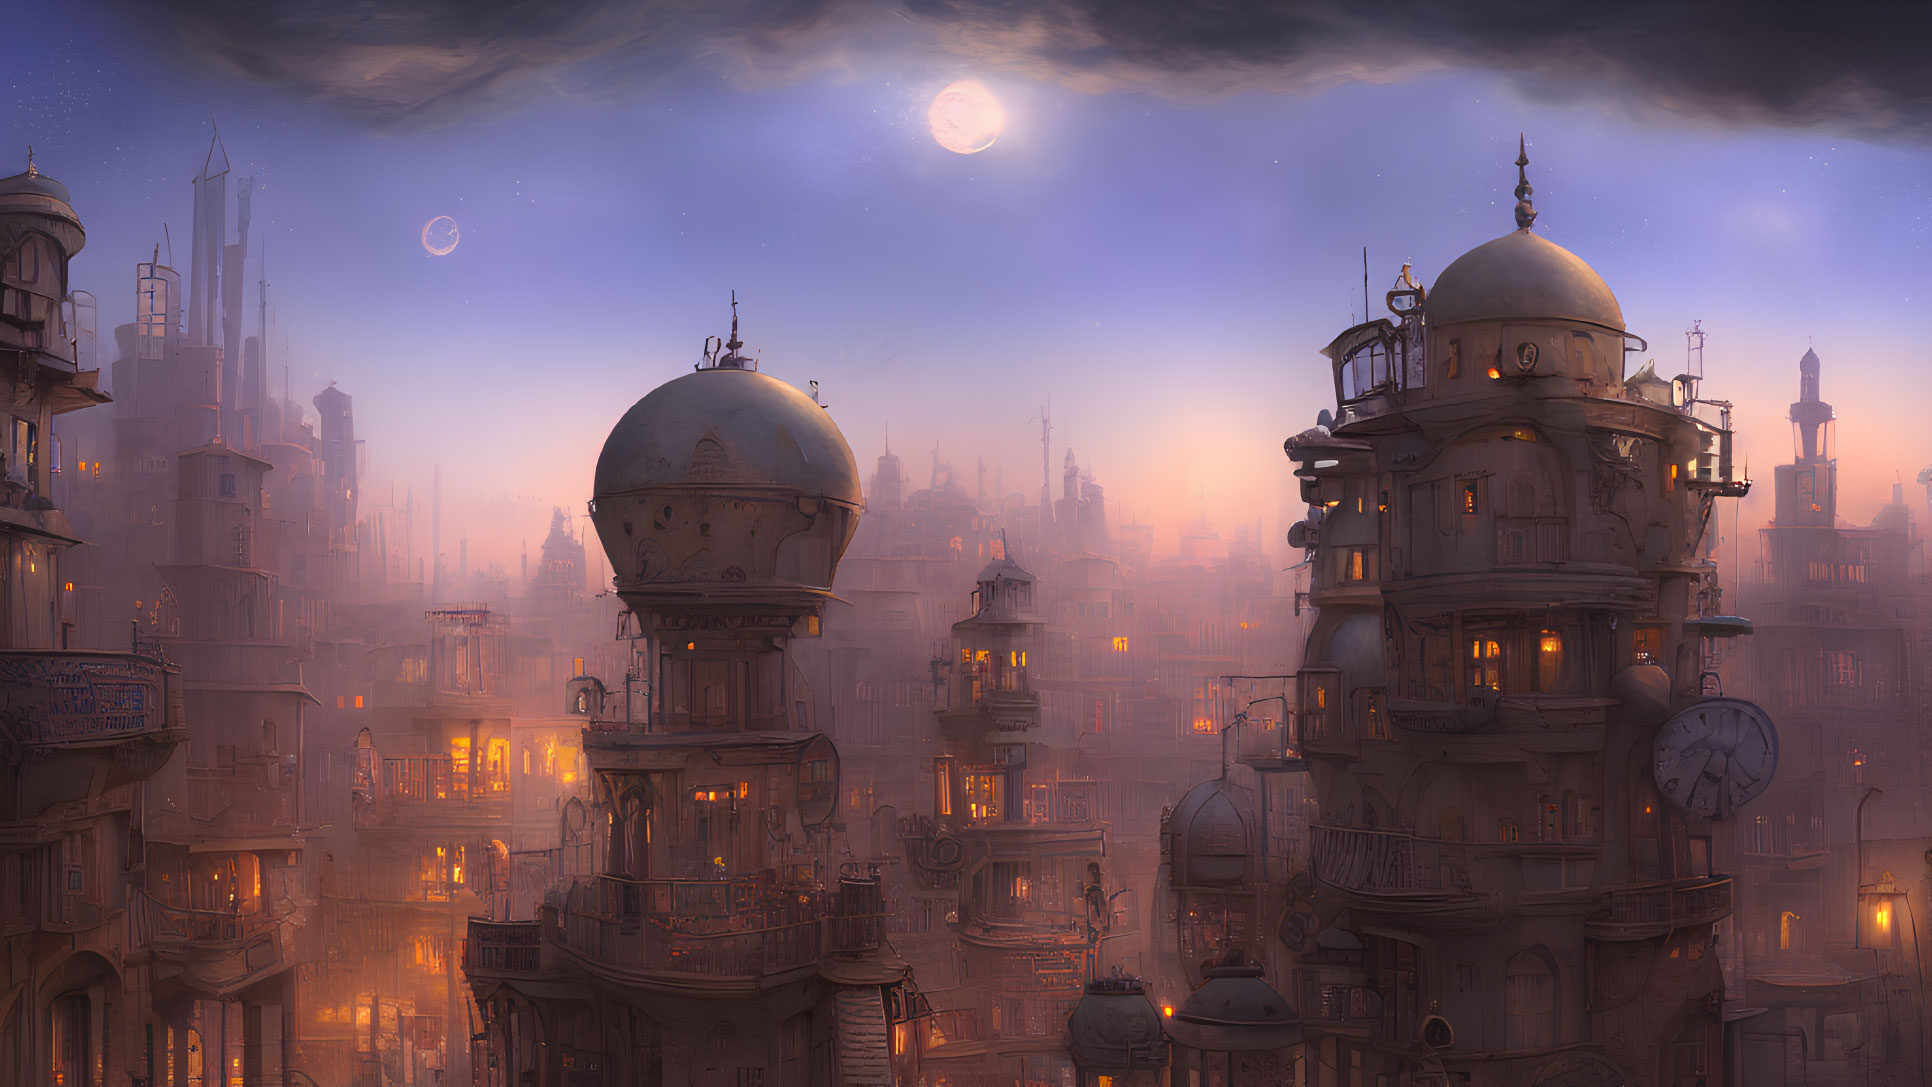 Fantastical cityscape at dusk with domed towers and multiple moons